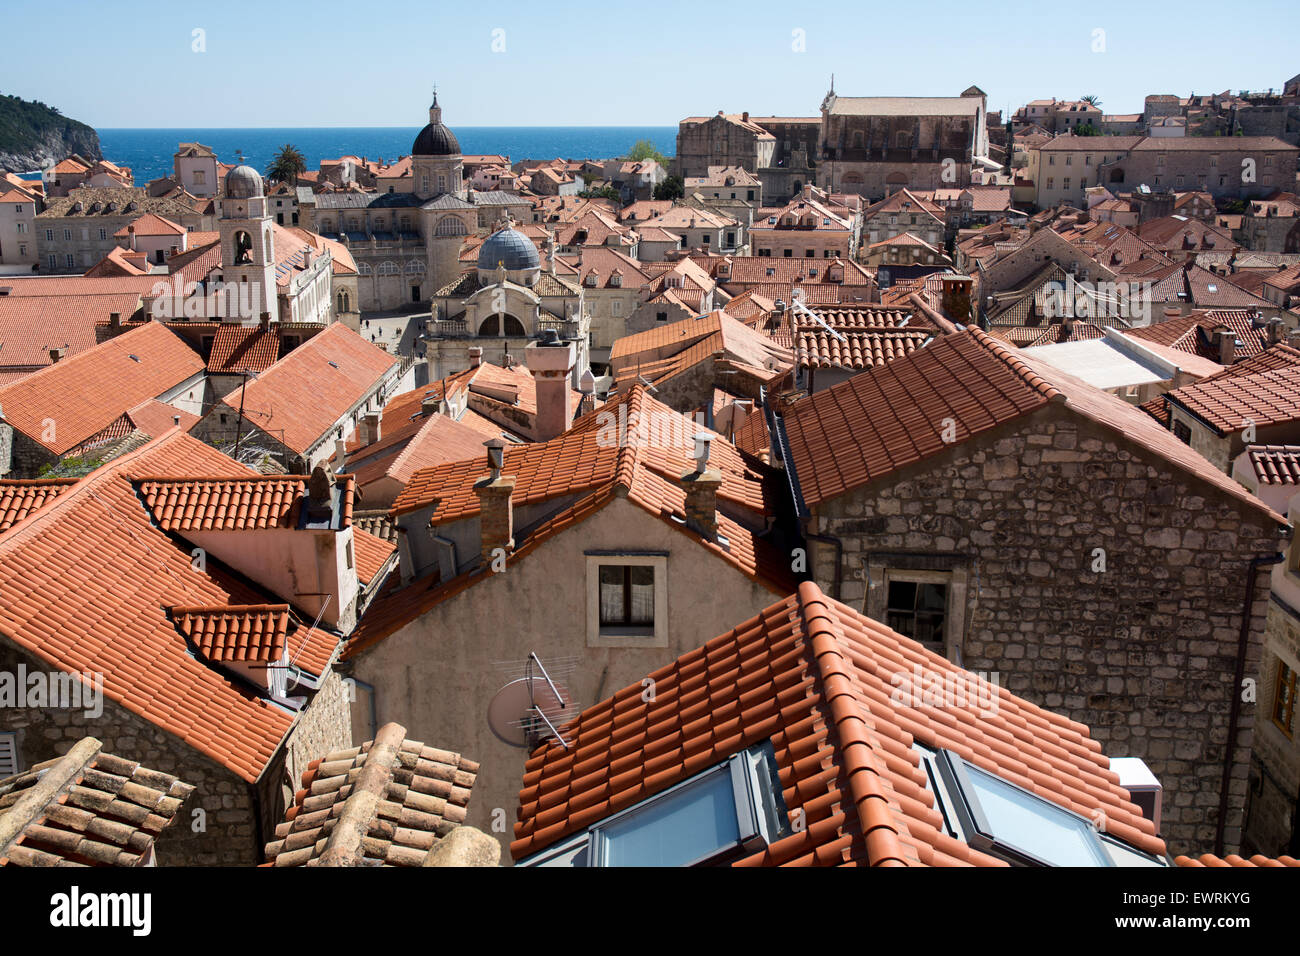 terracota rooftop scene of old city with clock tower cathedral-treasury tower and st. blaise church,dubrovnik, croatia Stock Photo